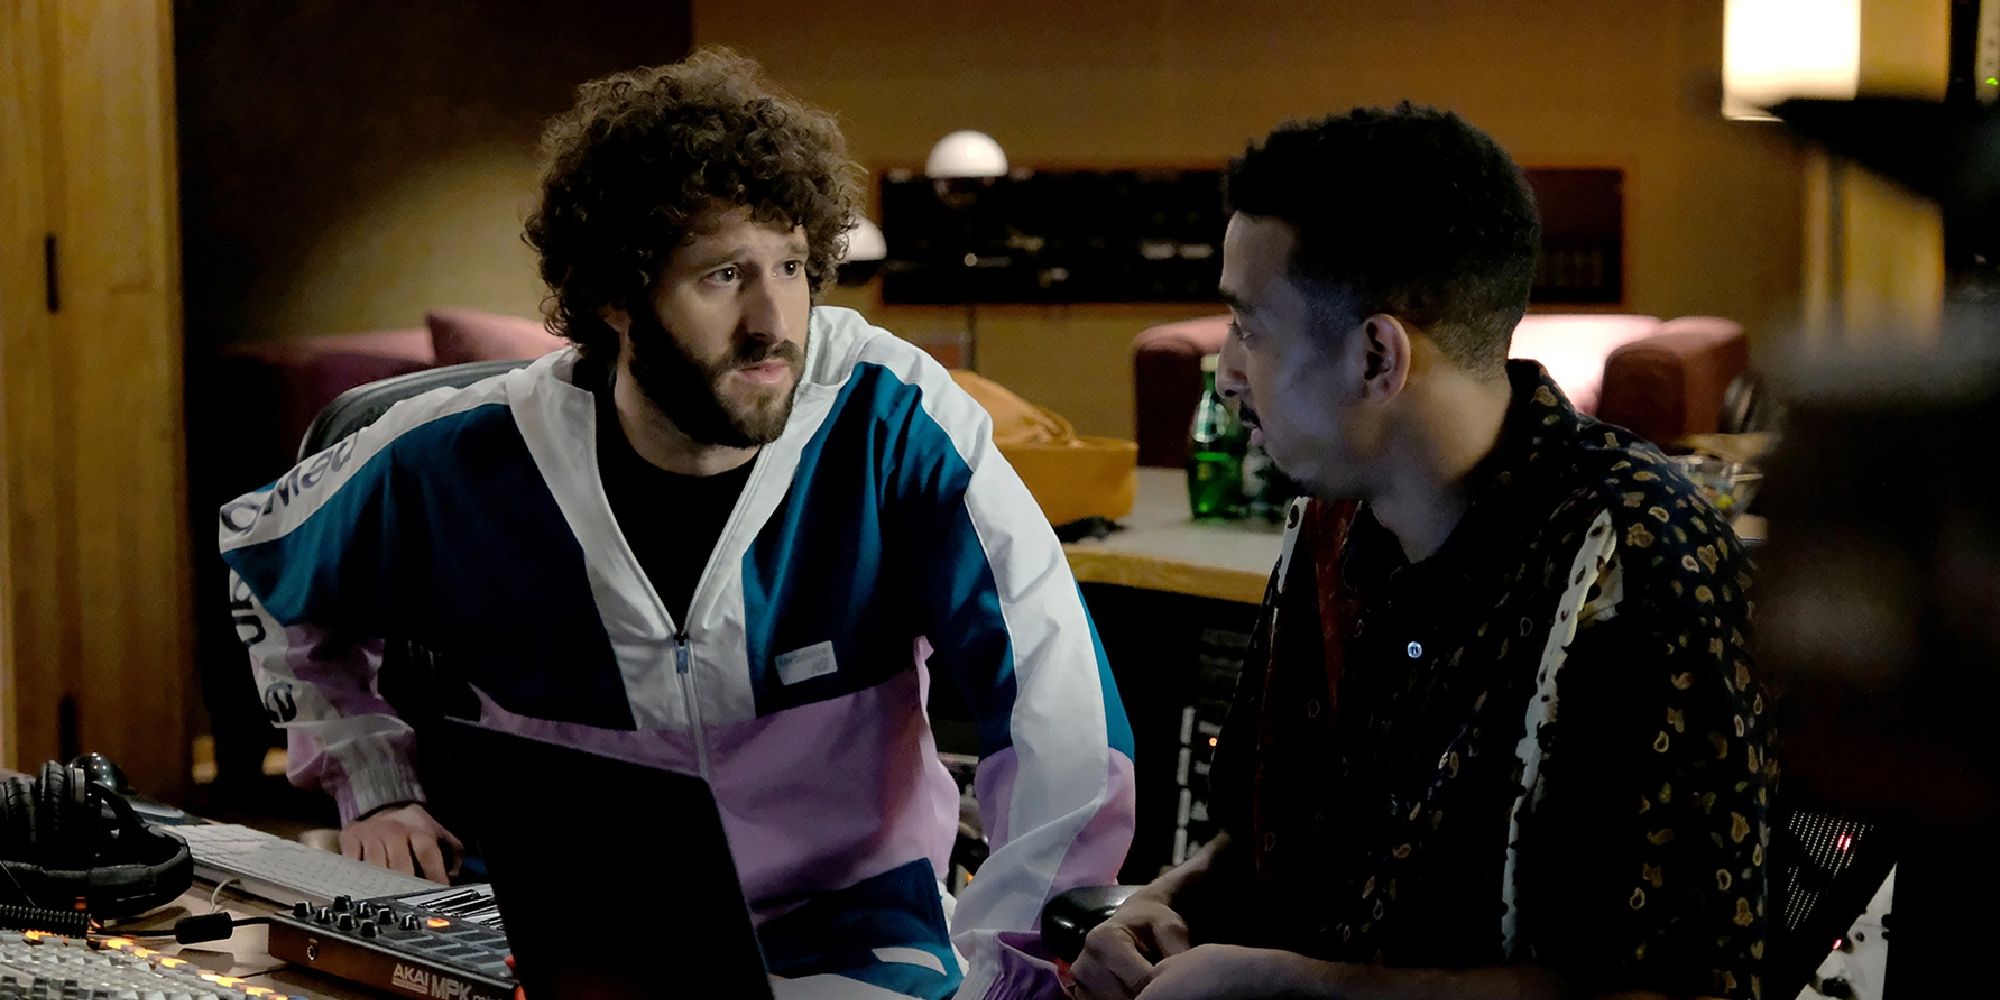 Dave Burd (Lil Dicky) talking to a producer in a recording studio